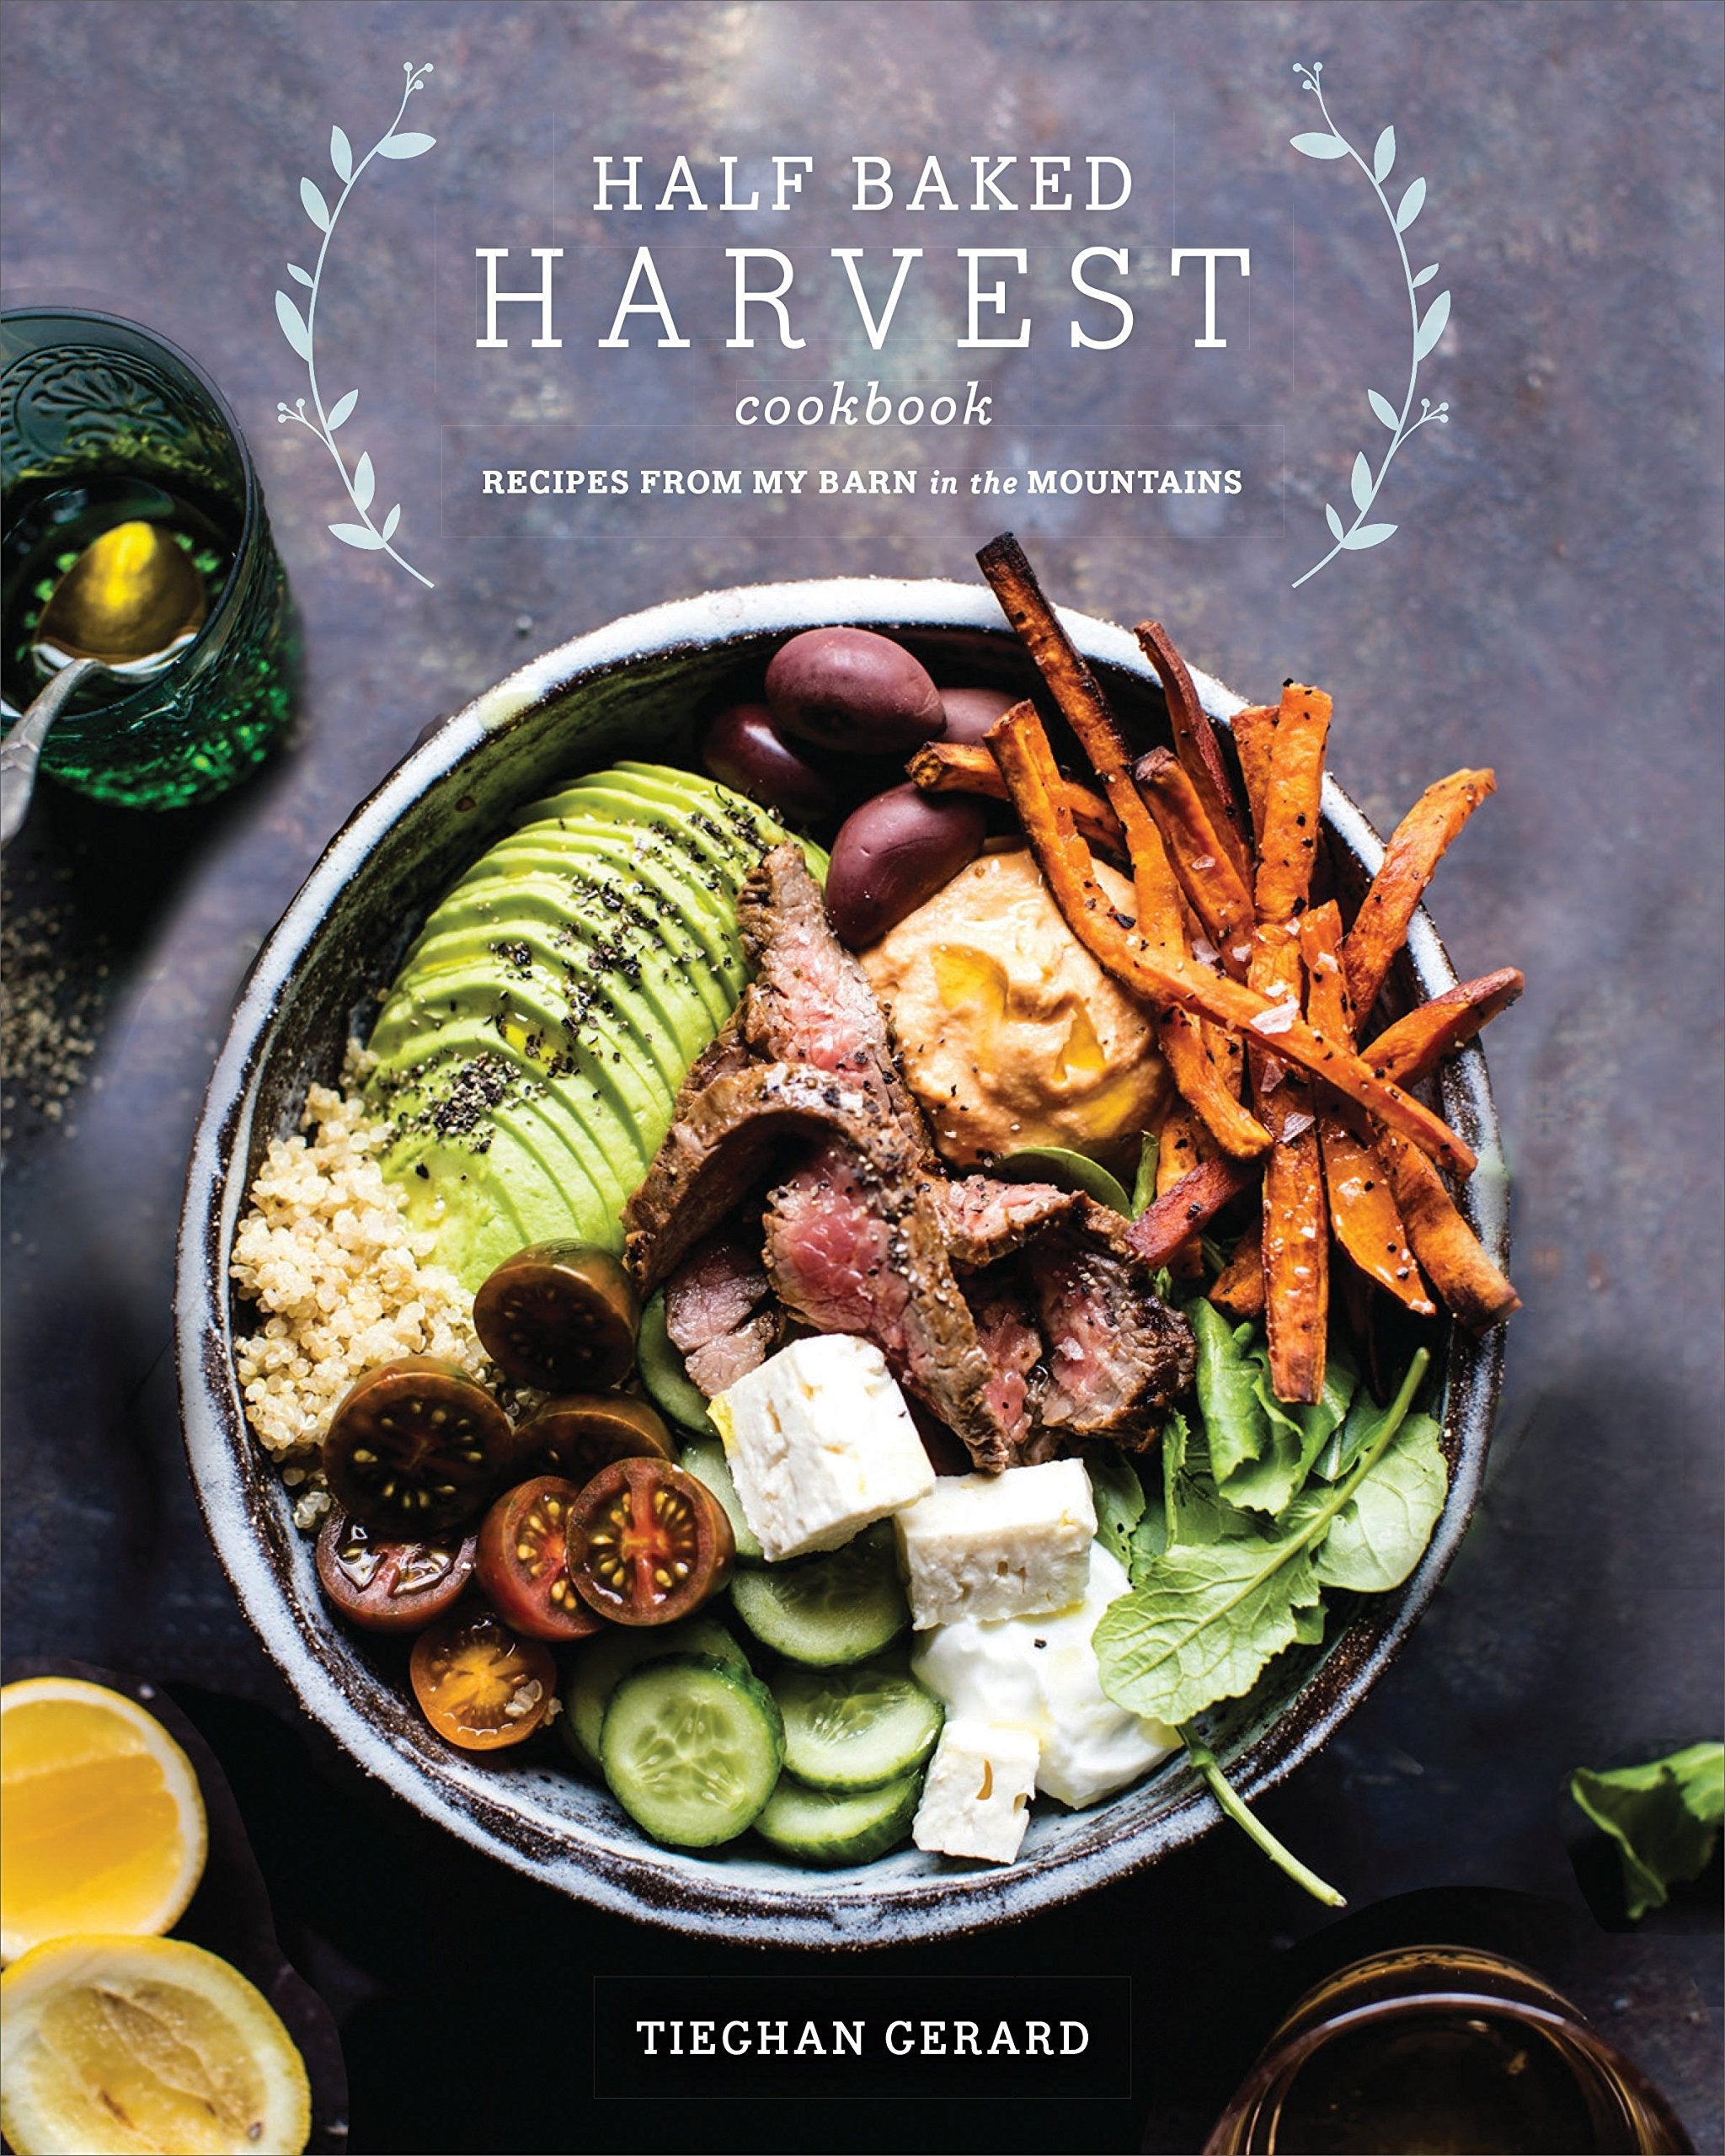 Half Baked Harvest Cookbook: Recipes from My Barn in the Mountains (Tieghan Gerard)